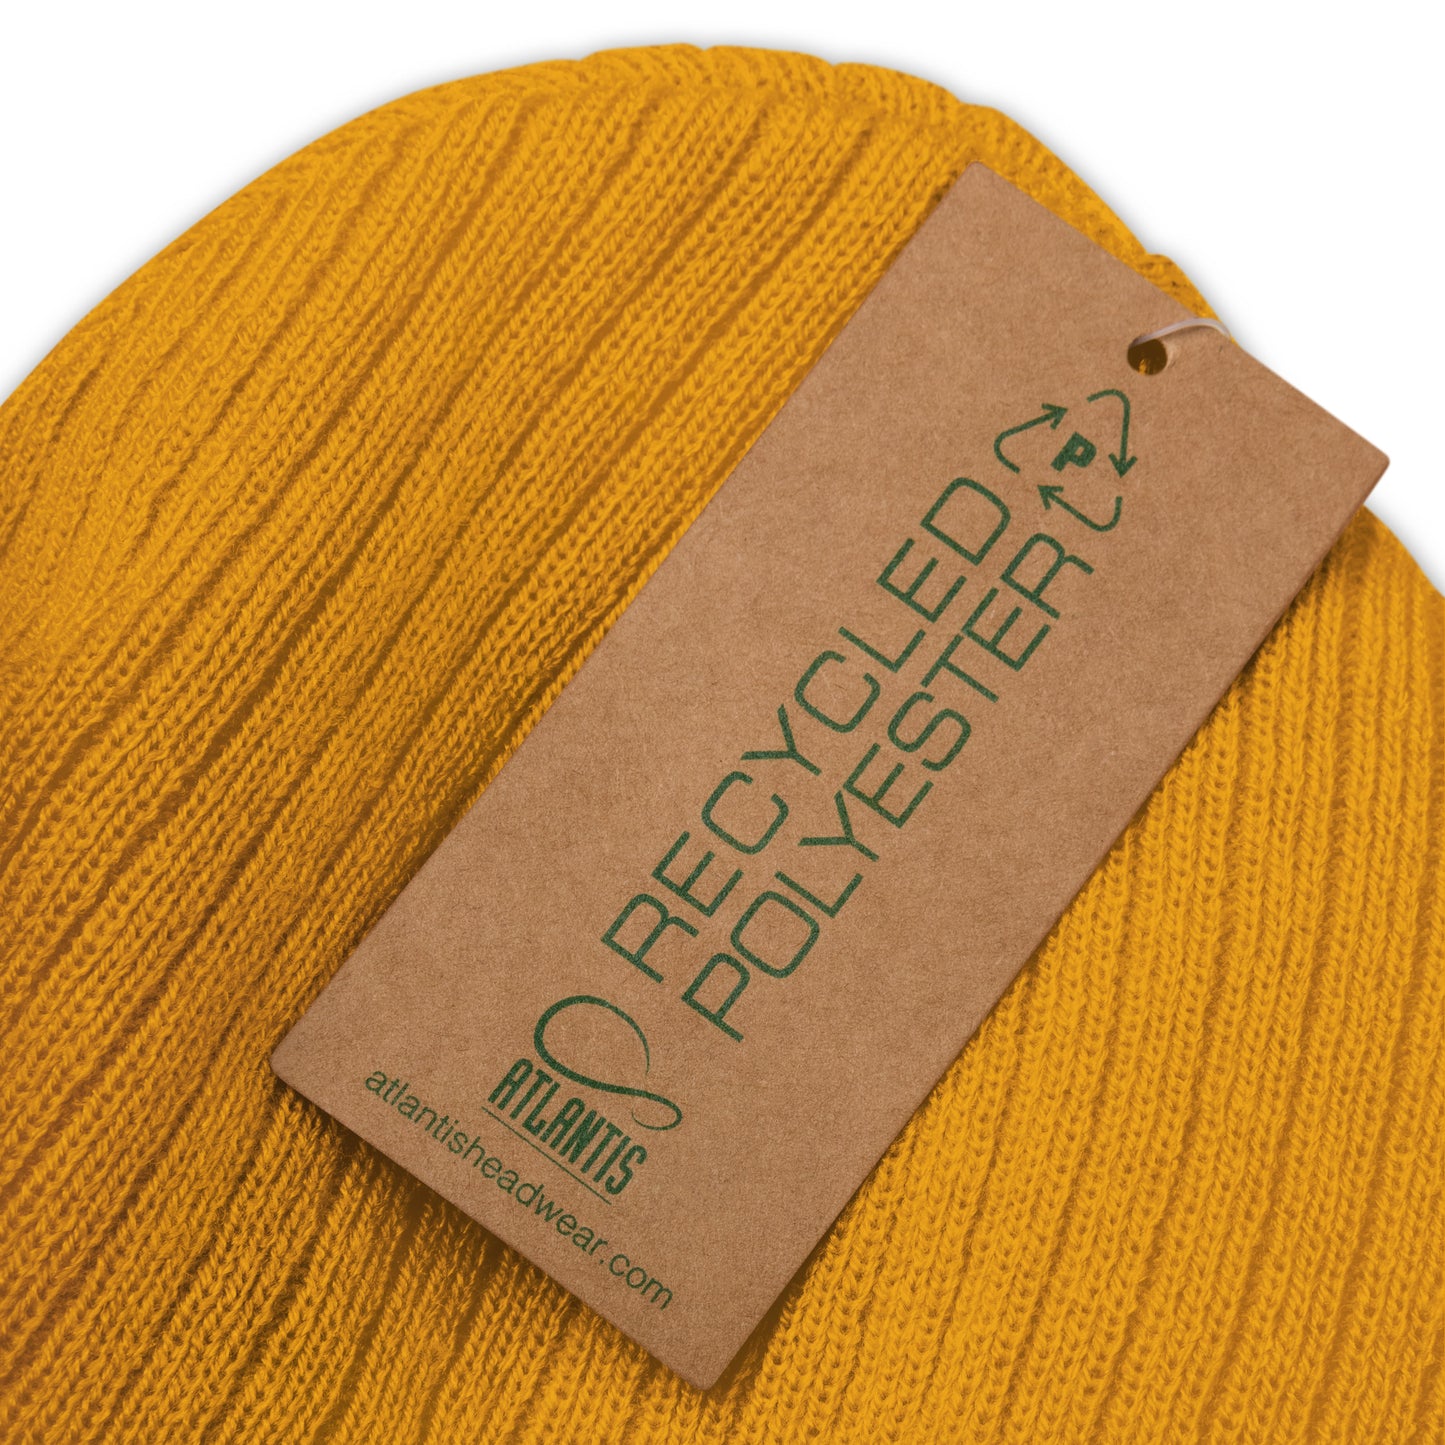 Chile Pepper Premium Ribbed knit beanie